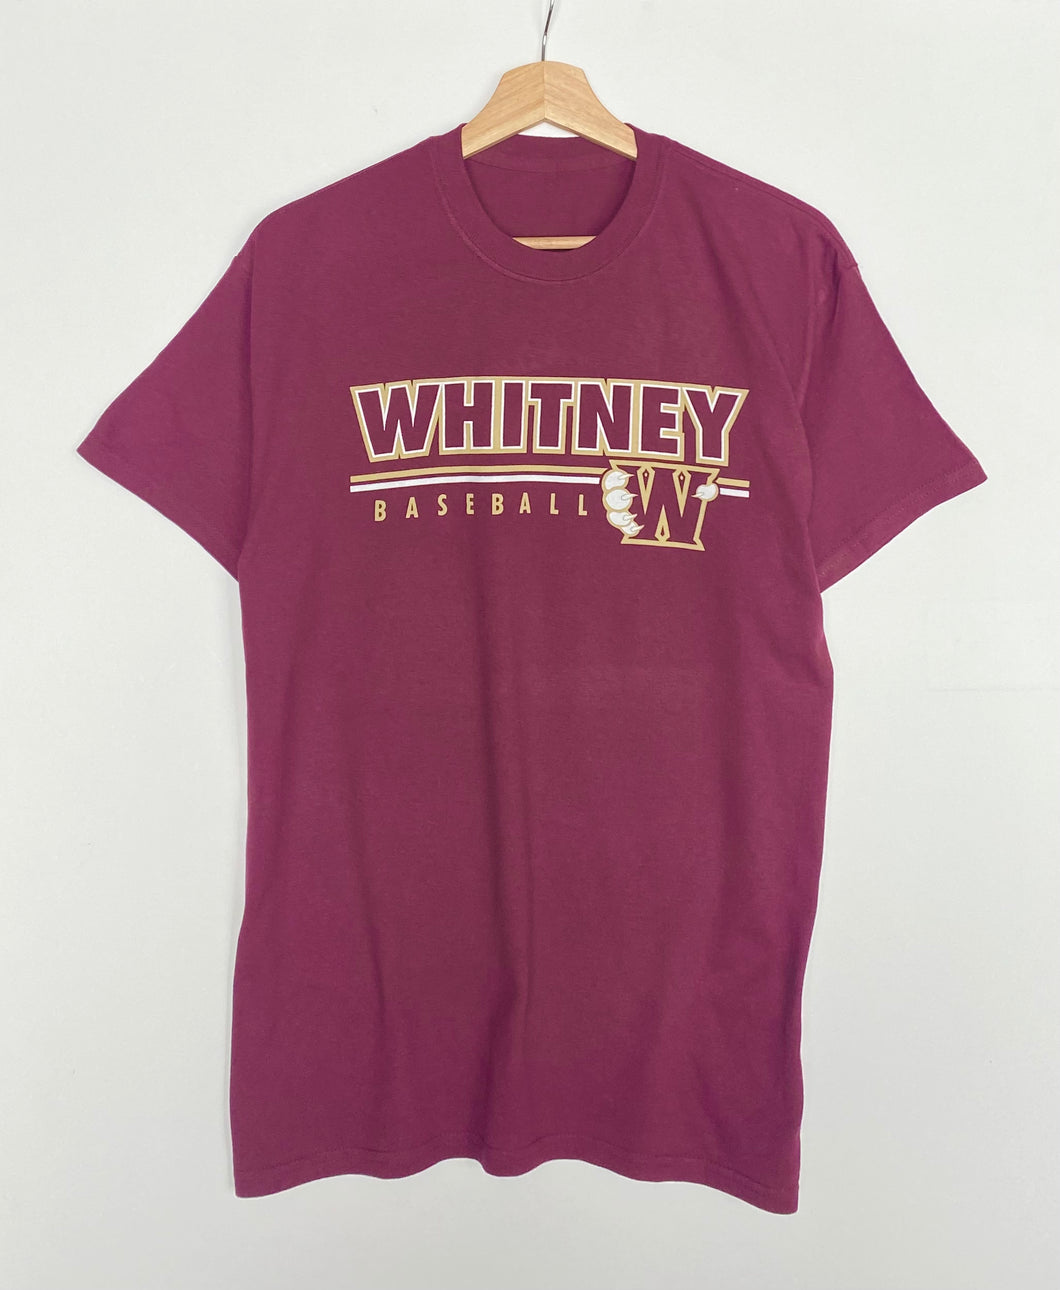 ‘Whitney’ American College t-shirt (S)